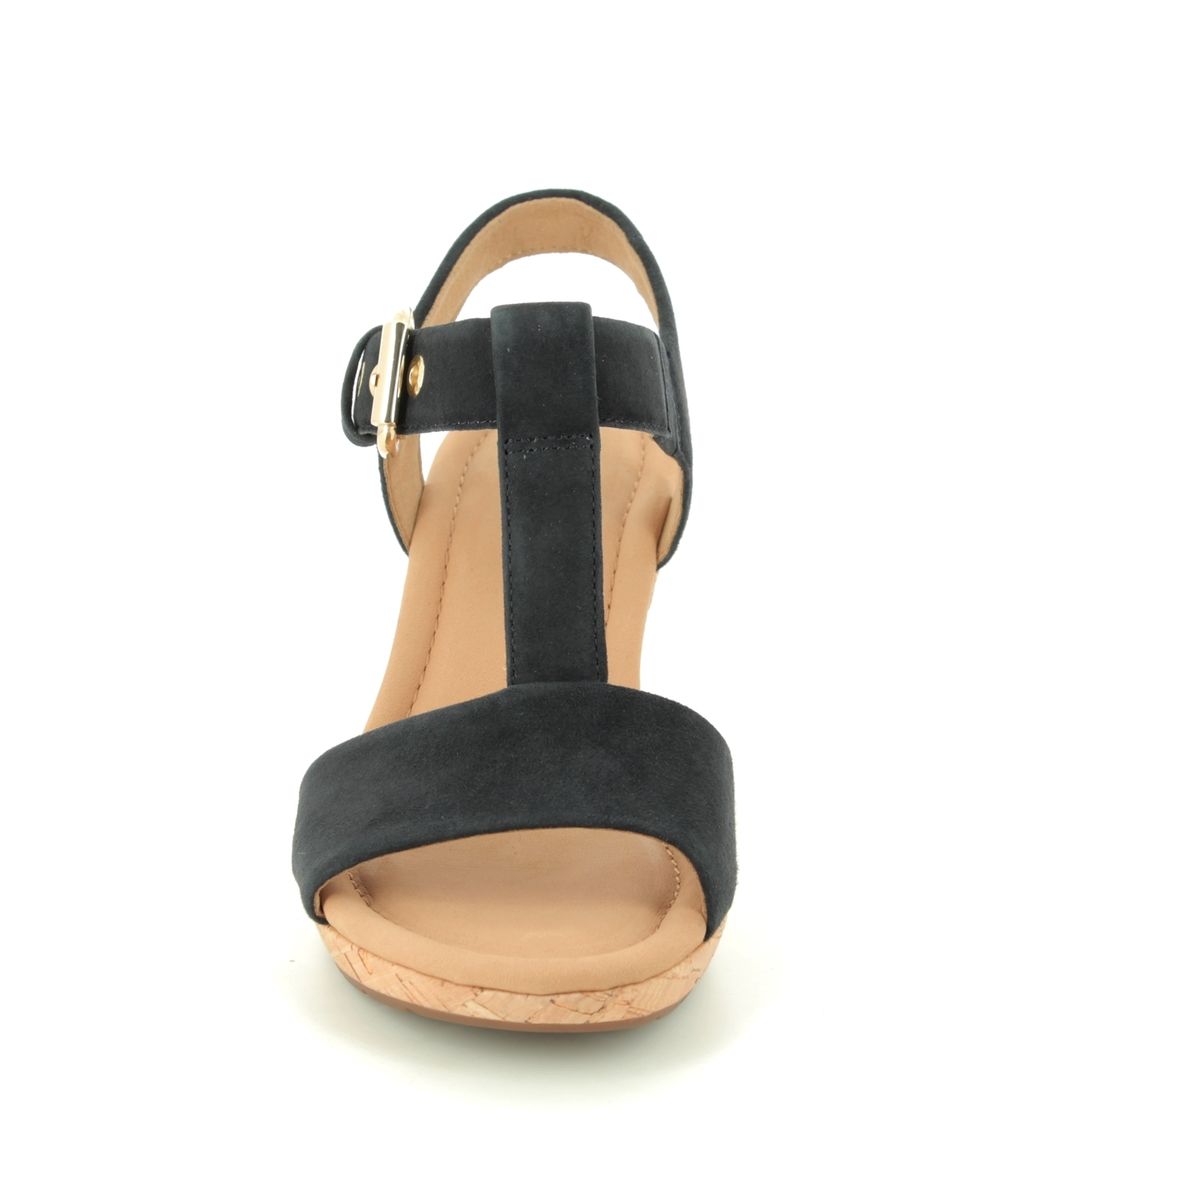 gabor navy wedge shoes